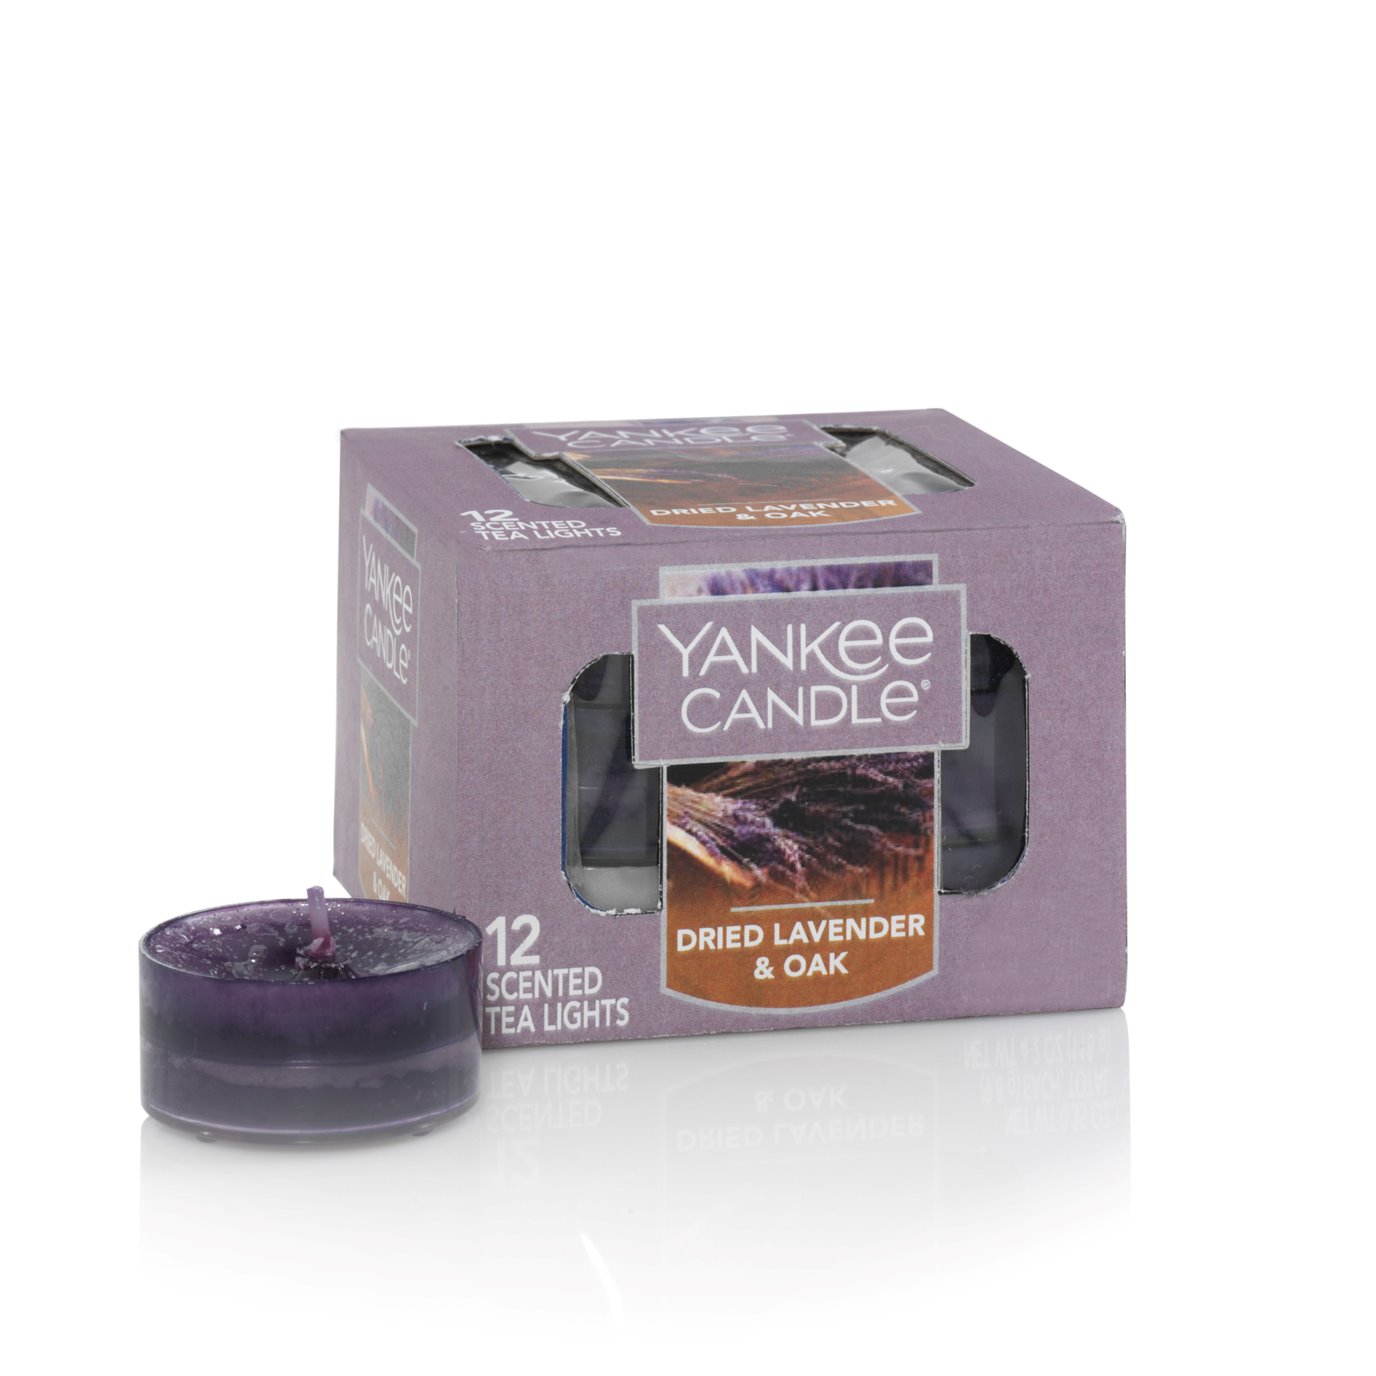 Yankee Candle Dried Lavender and Oak Tea Lights